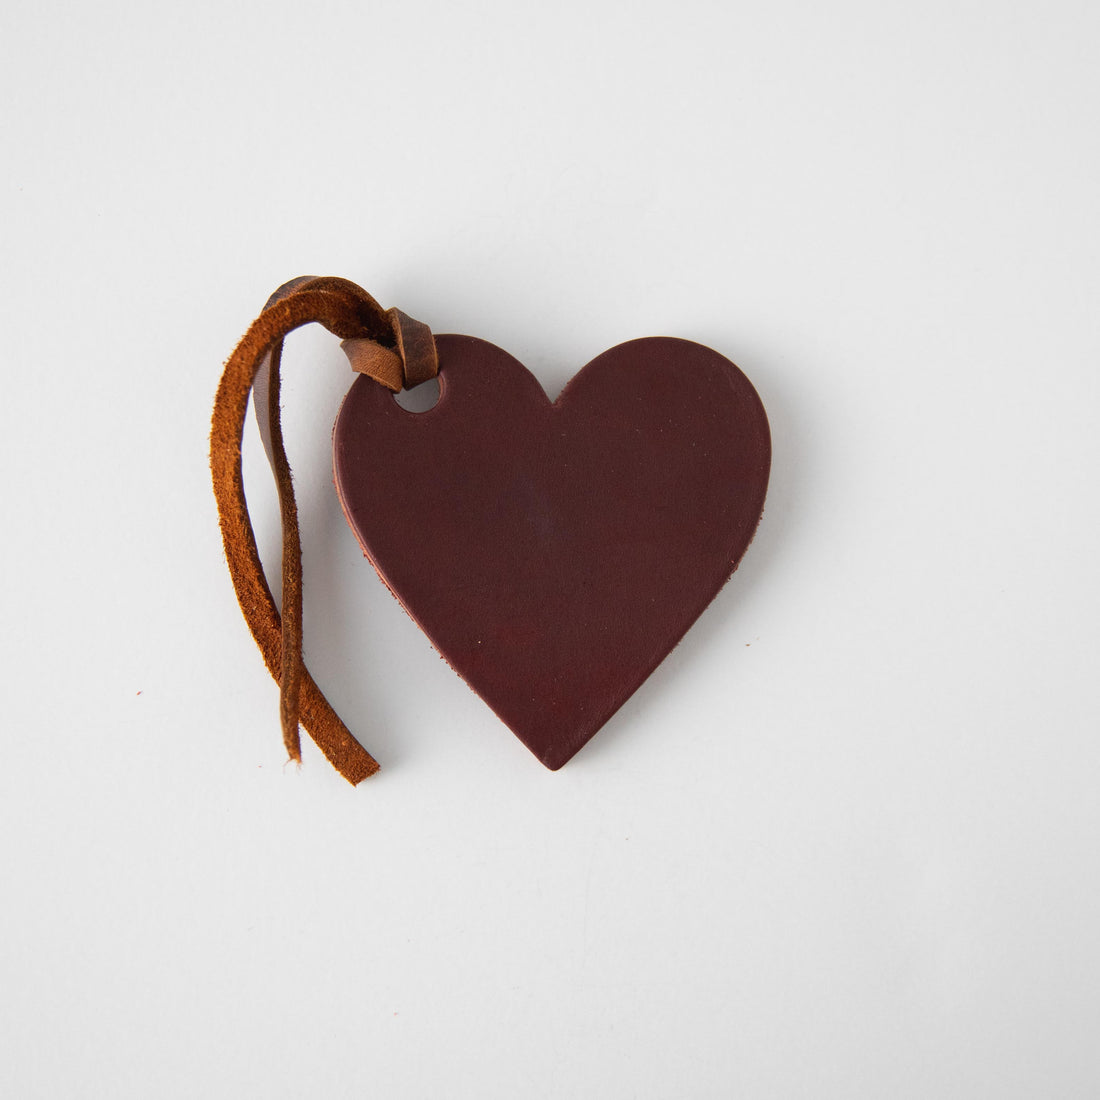  UKCOCO 200 Pcs Heart Clothes Tags Leather Patches for